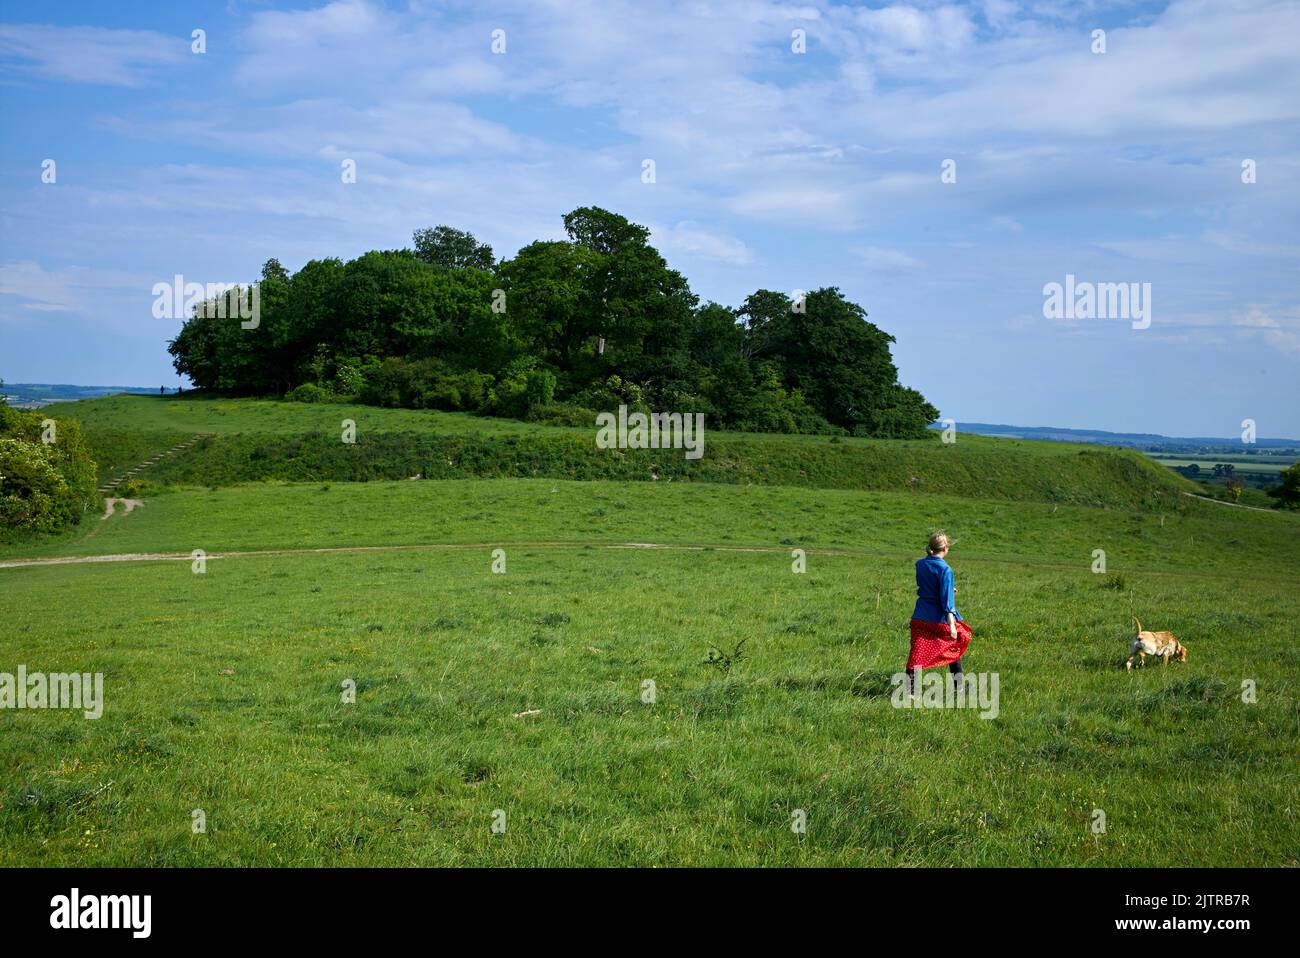 Wittenham Clumps are a pair of wooded chalk hills in the Thames Valley, in the civil parish of Little Wittenham, Oxfordshire. Stock Photo